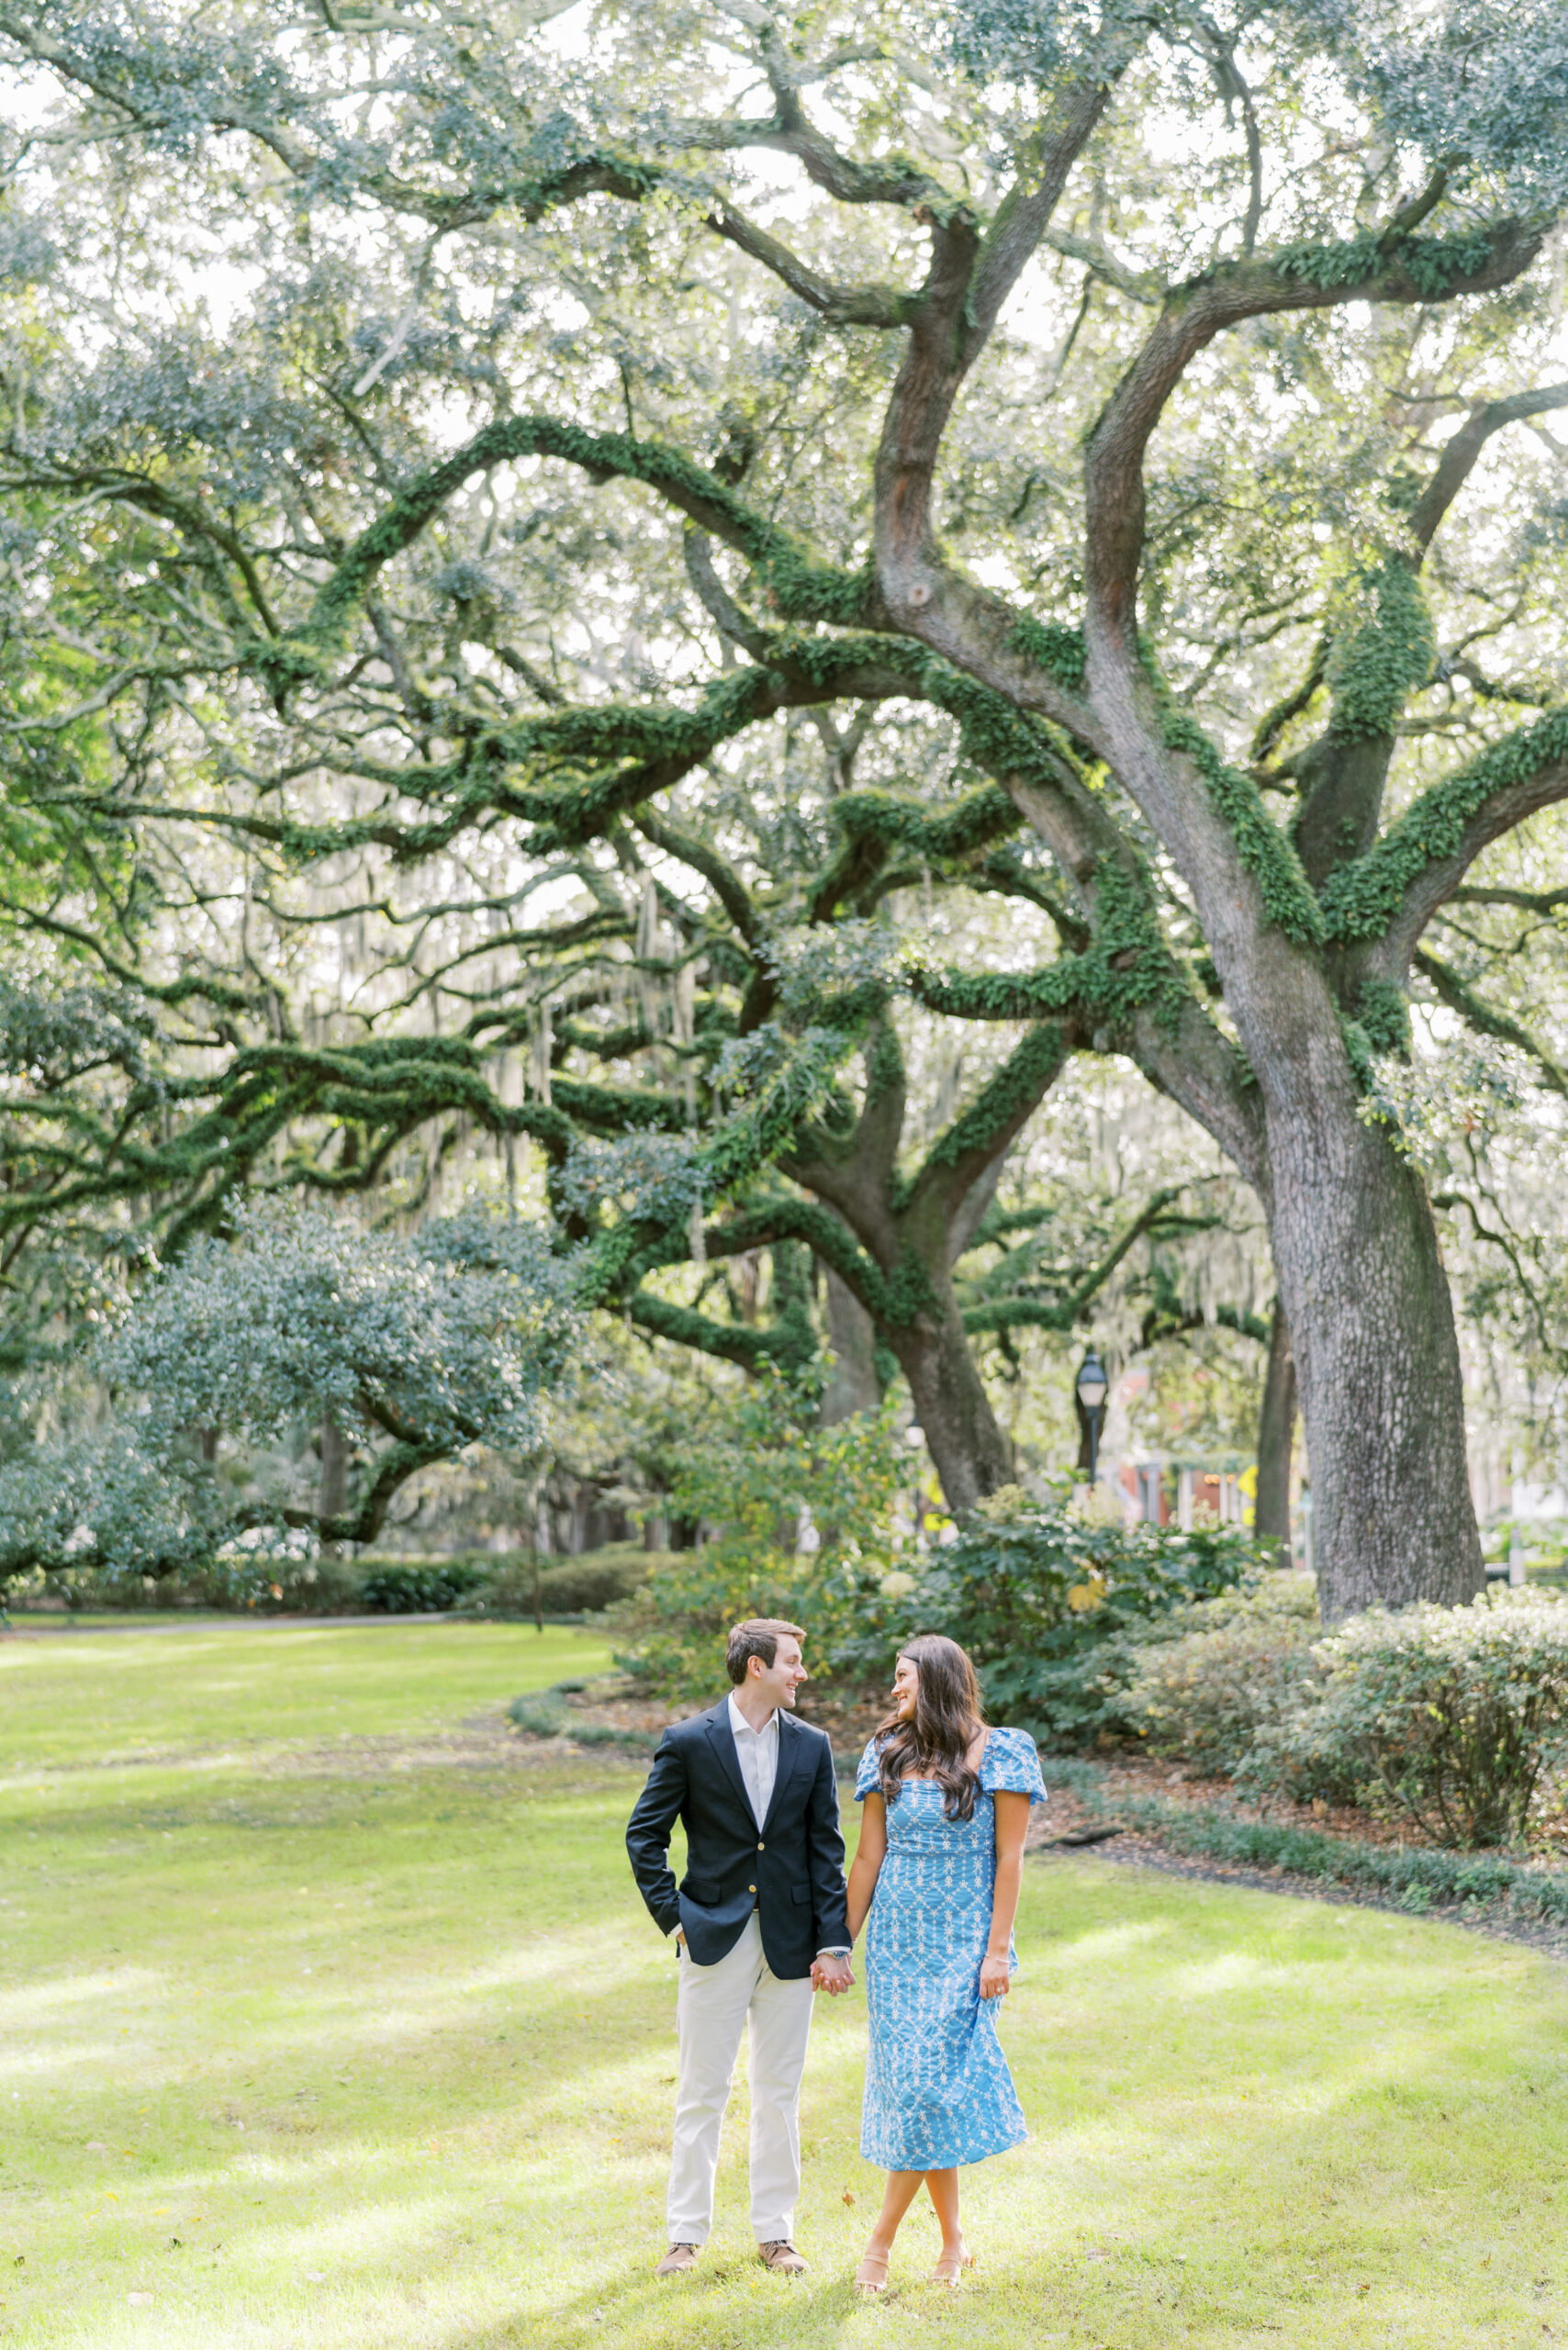 Engagement session in downtown Savannah GA in Forsyth Park. engagement photos under the oaks.